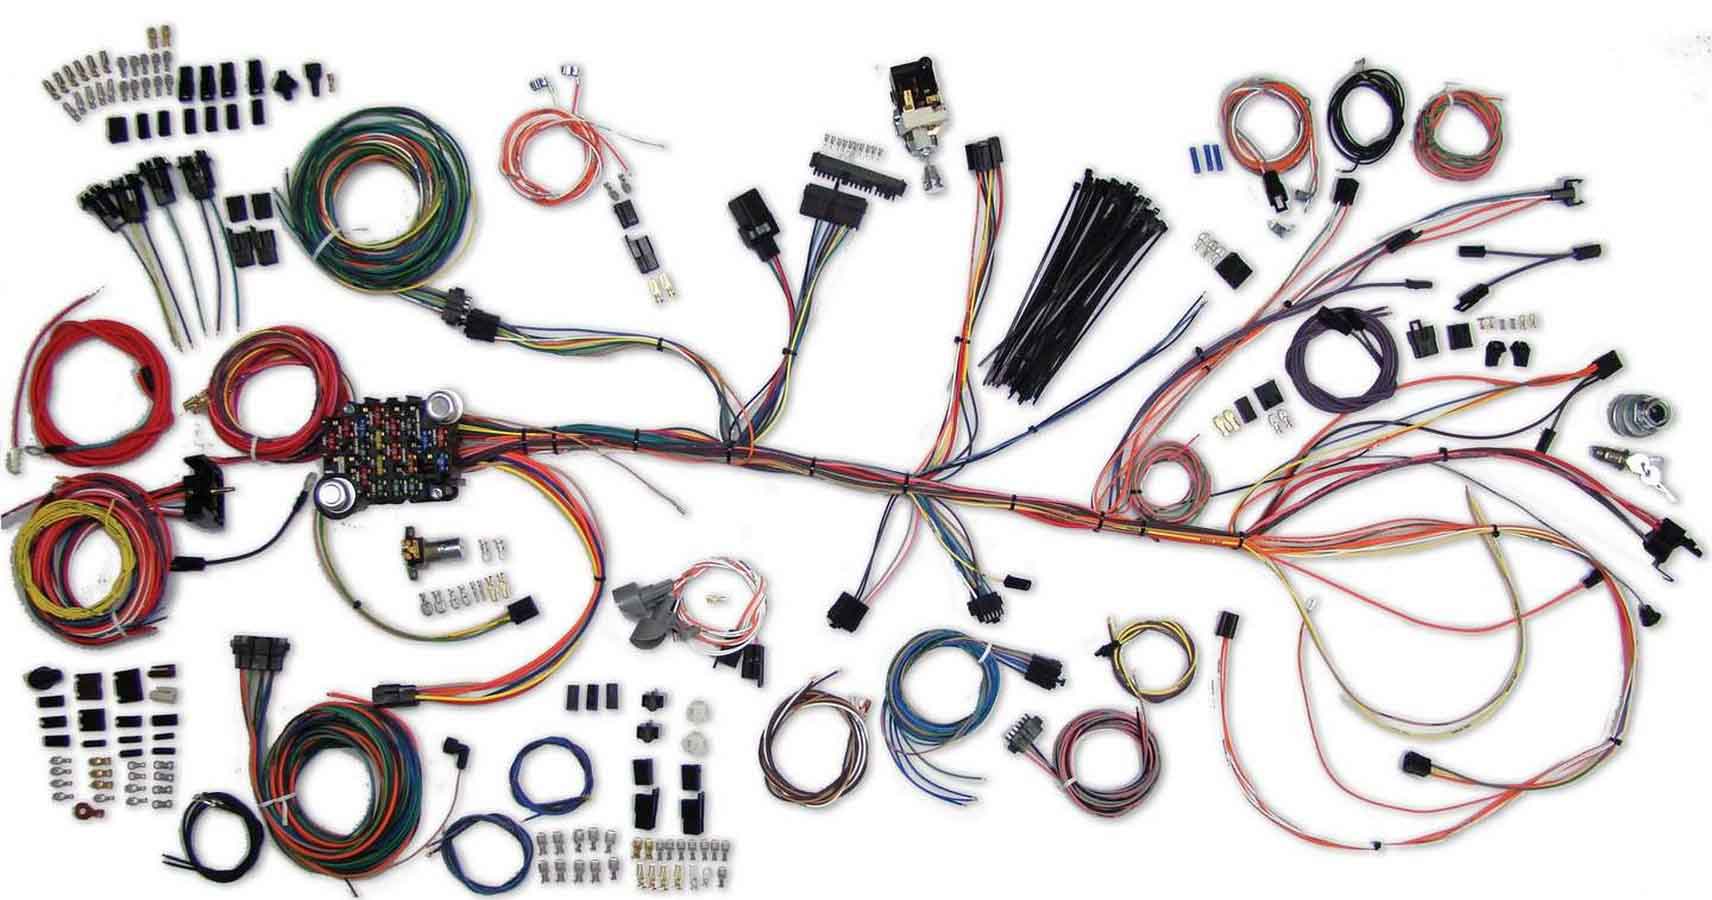 American Auto Wire Wiring Diagram from racecareng.com